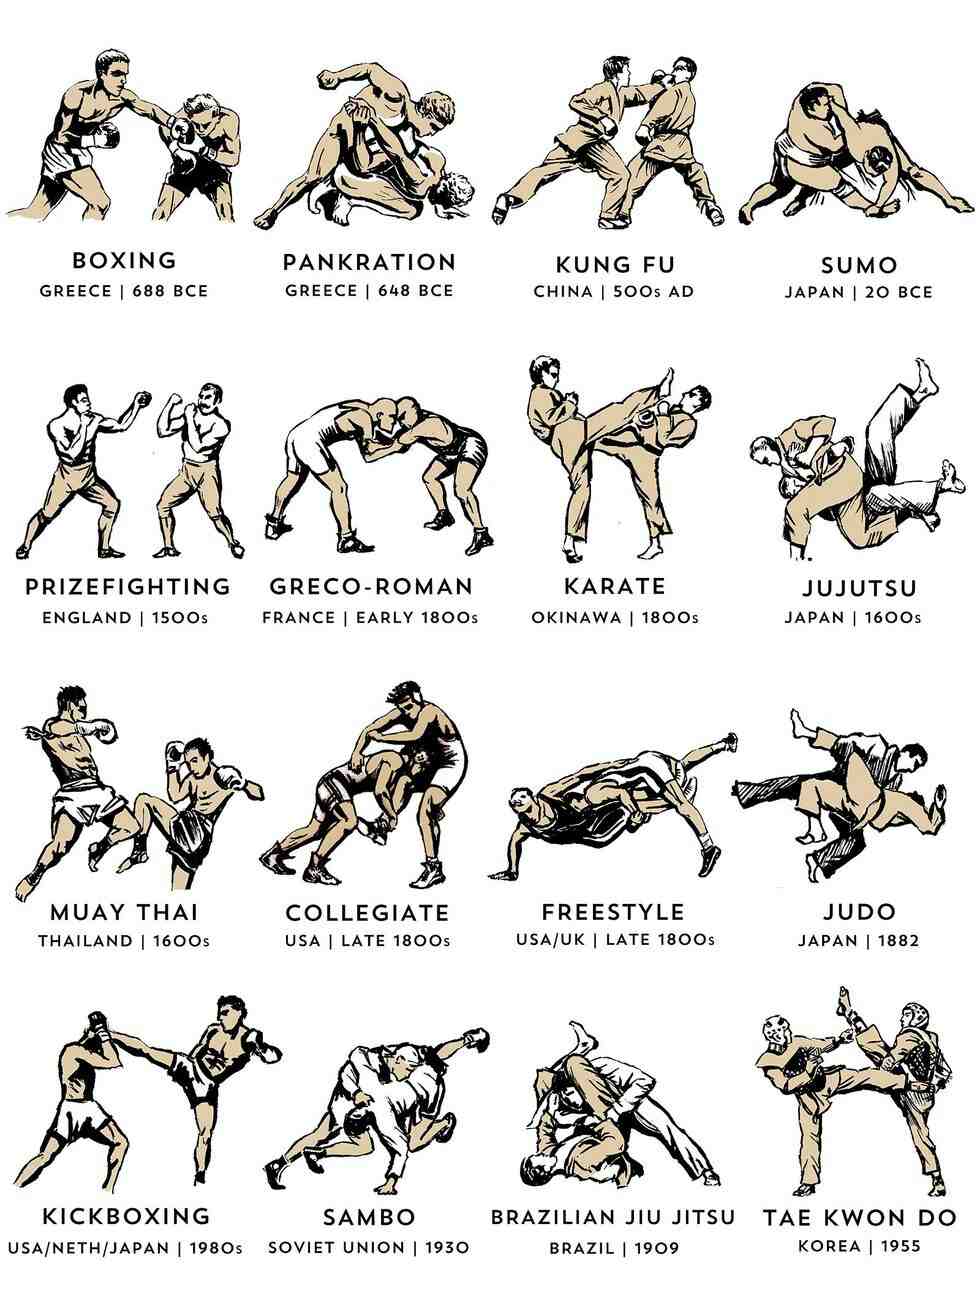 What's the best fighting style to learn?